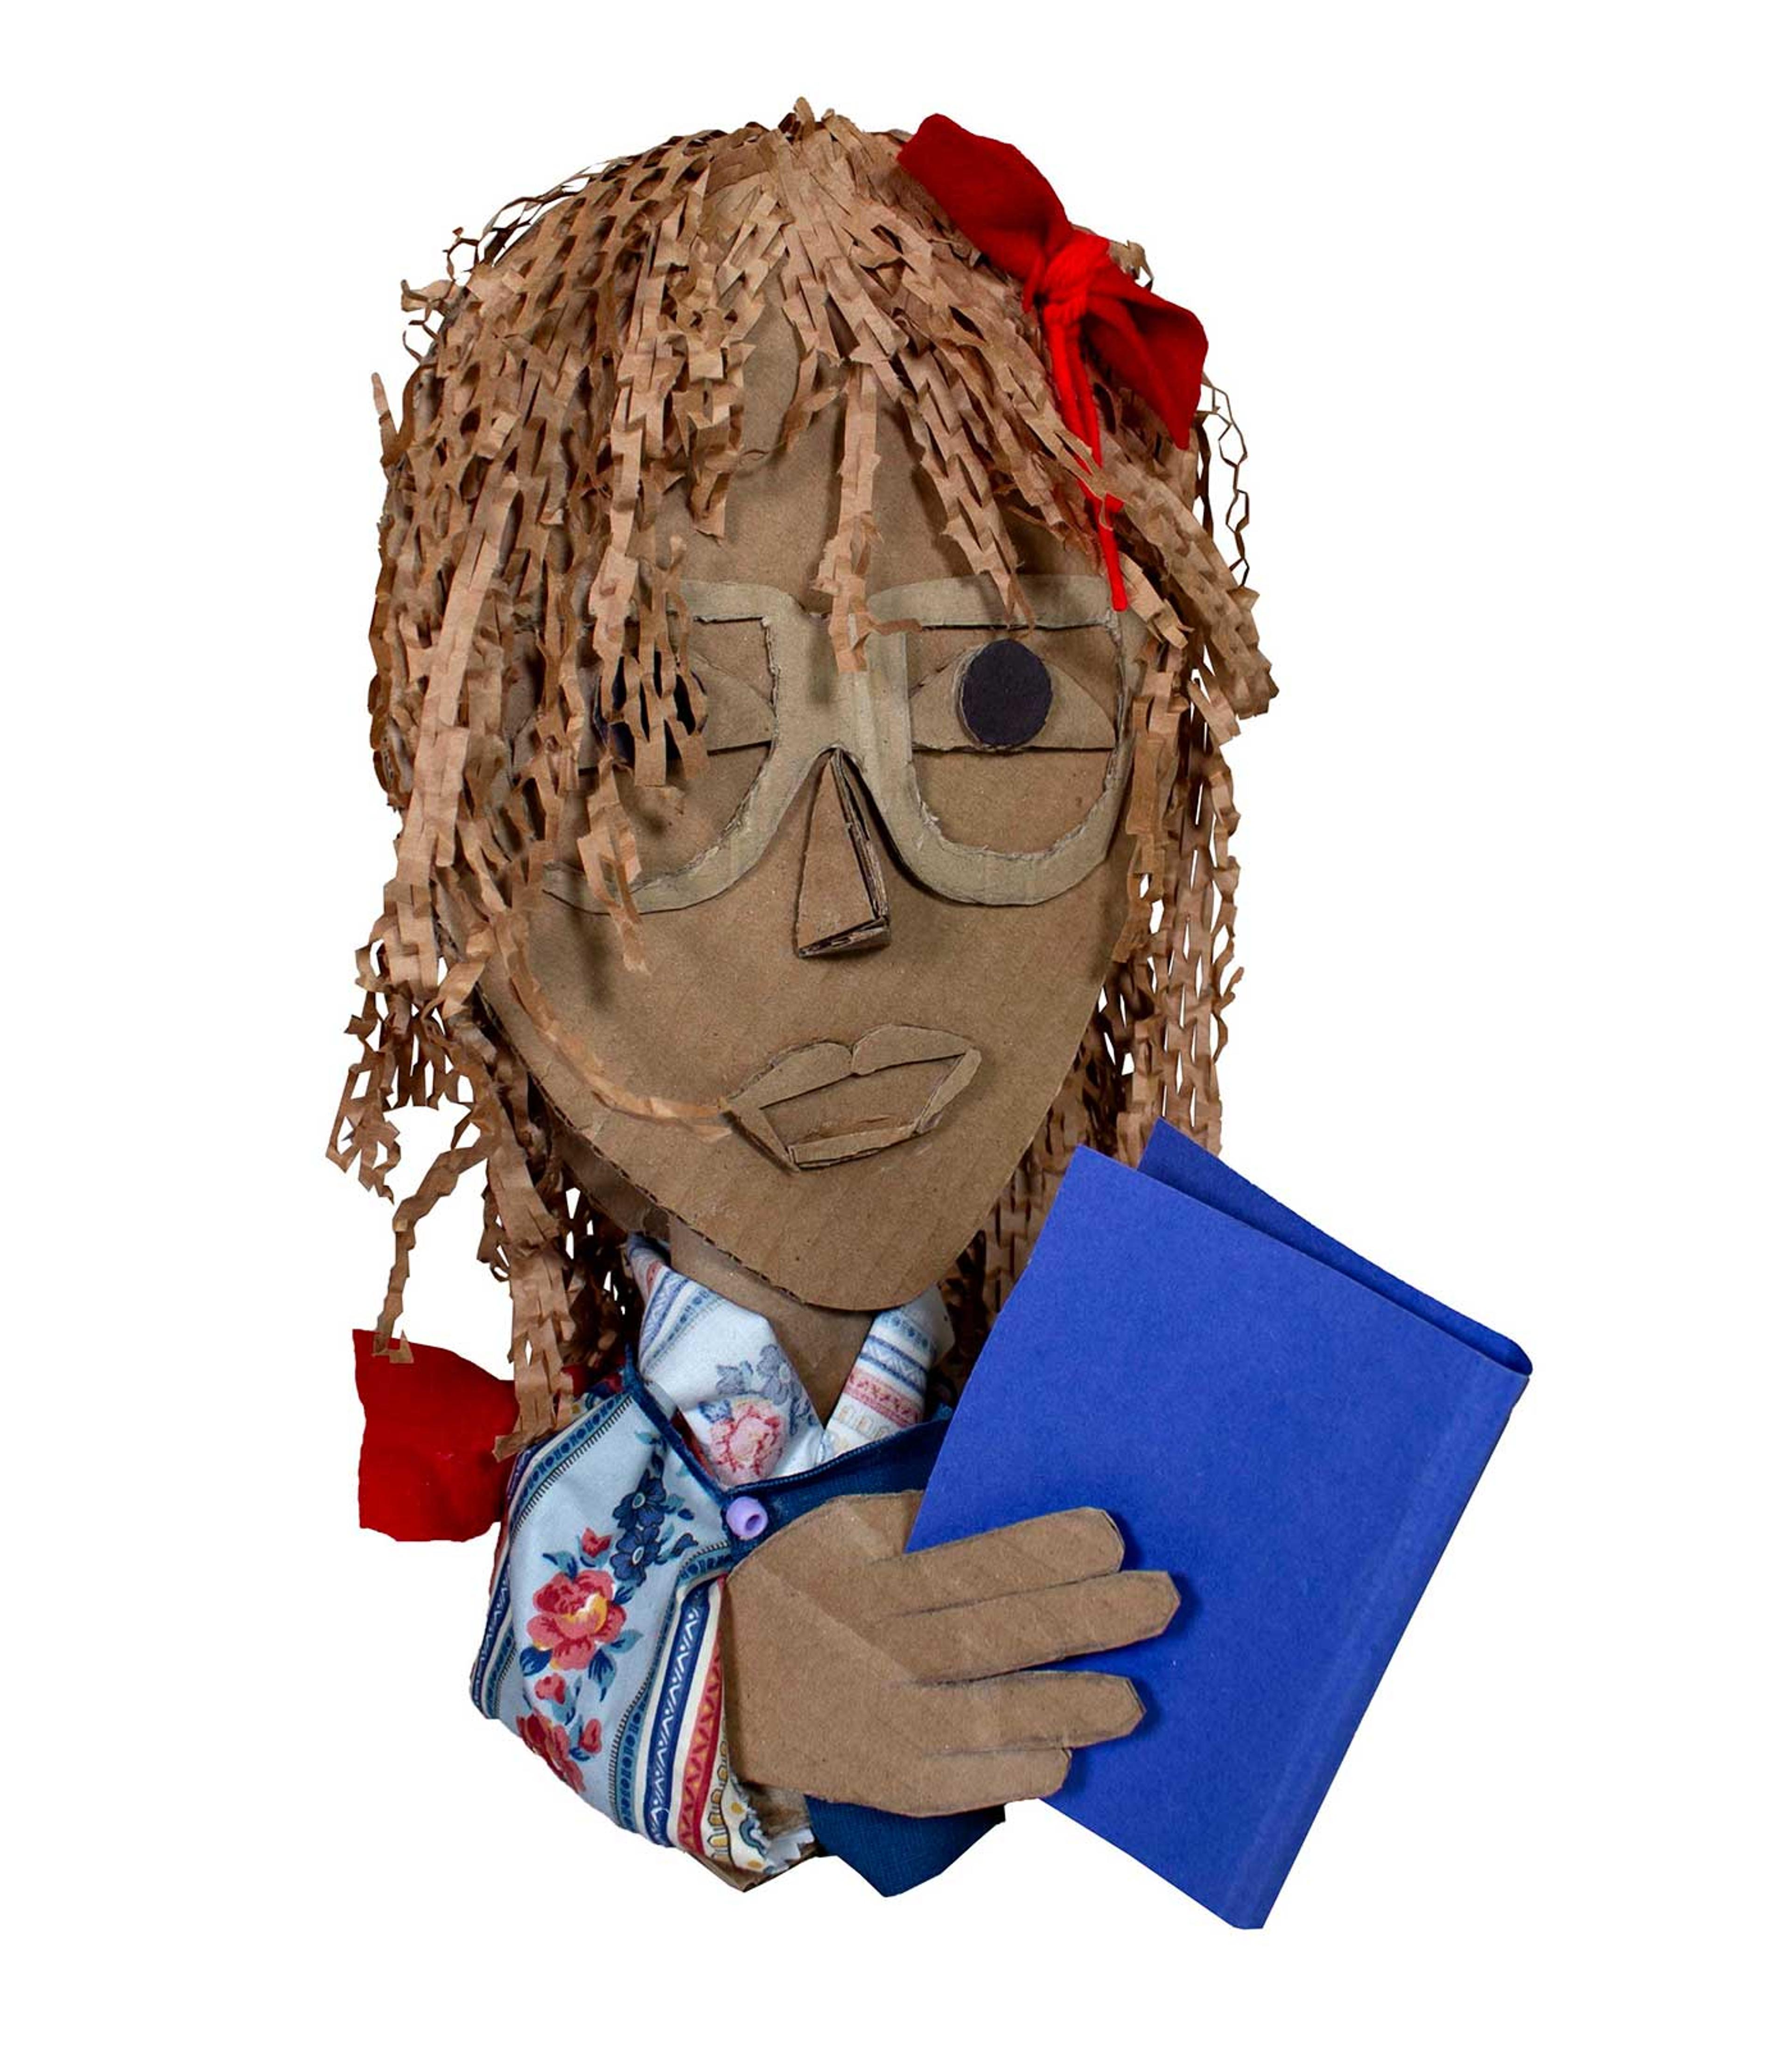 Cardboard, paper, and cloth scultpure of a child wearing glasses reading a blue book.